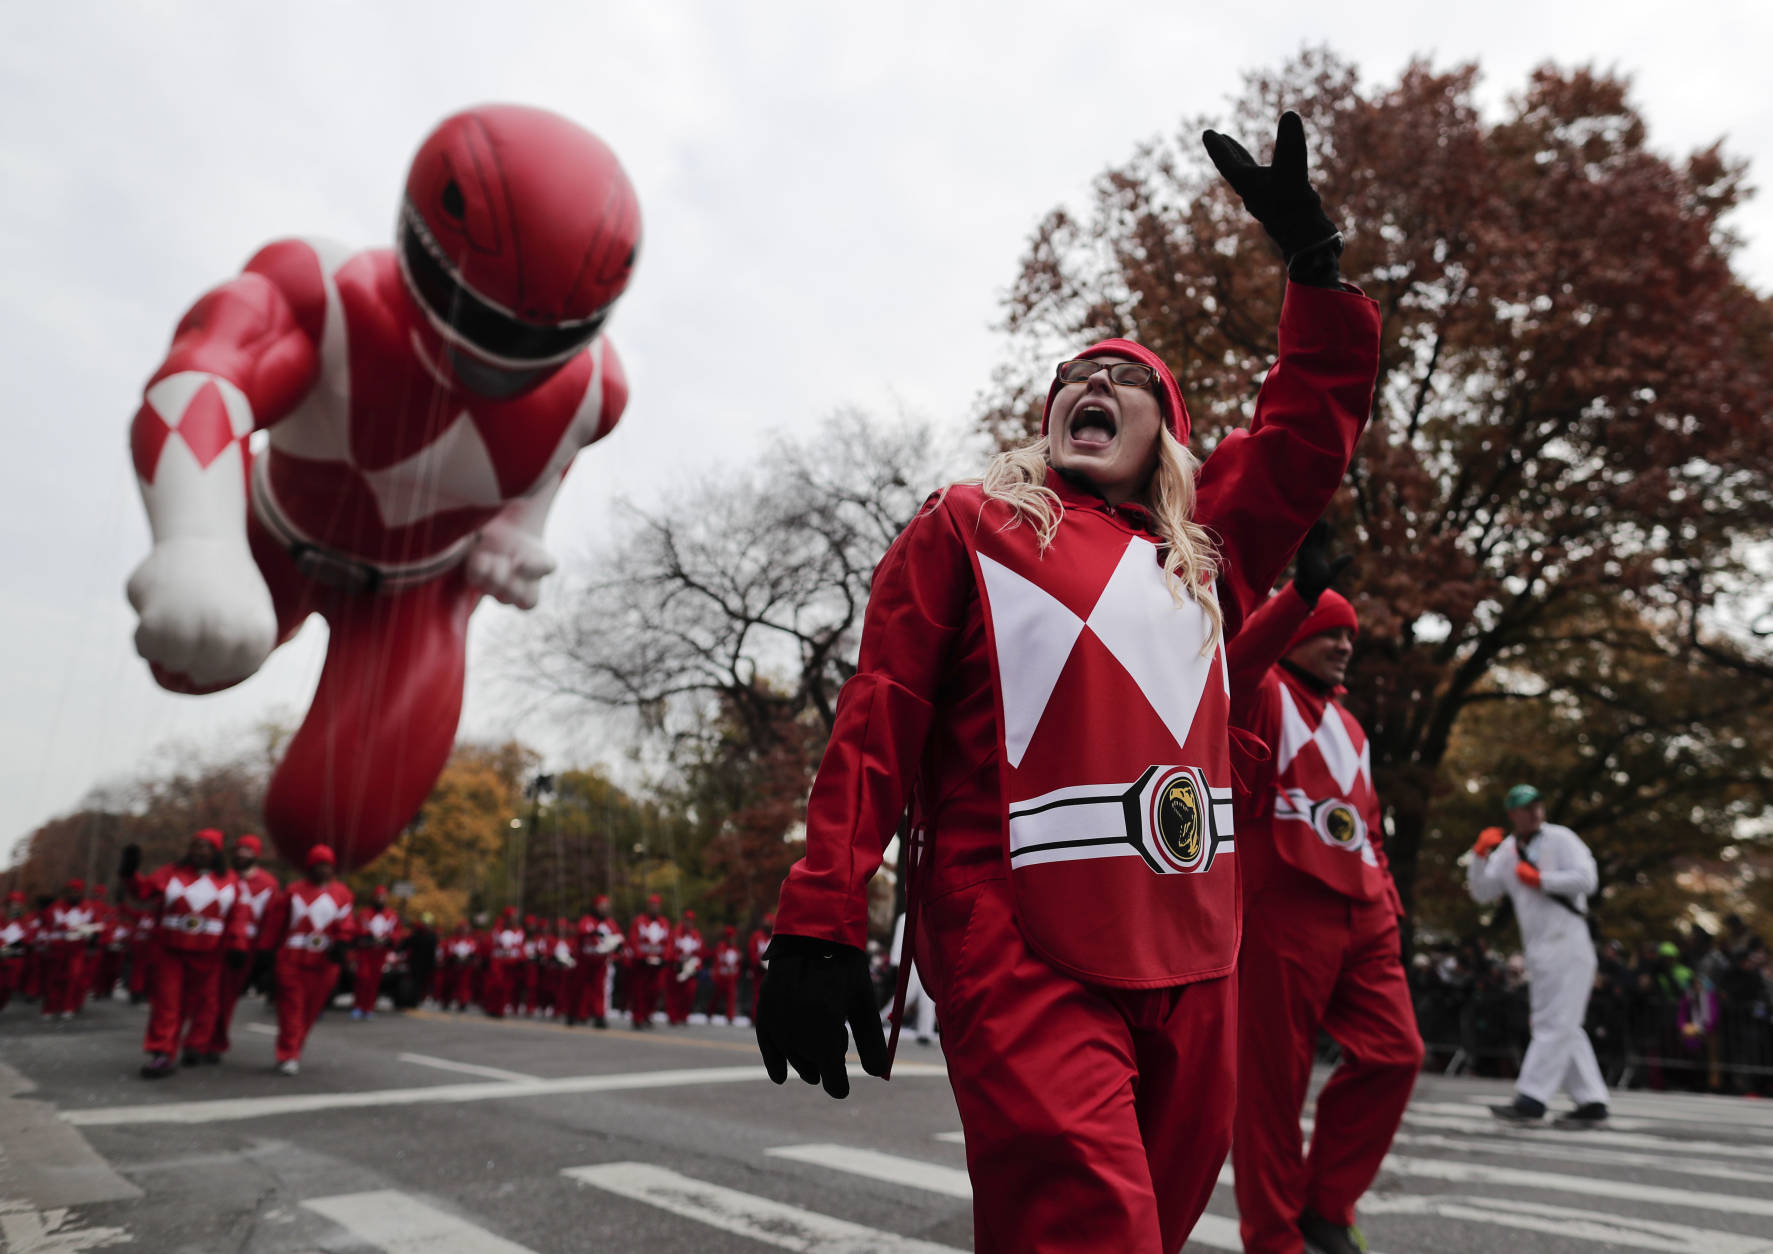 A balloon operator waves to spectators while guiding the Red Ranger balloon along West Central Park during the Macy's Thanksgiving Day parade, Thursday, Nov. 24, 2016, in New York. (AP Photo/Julie Jacobson)